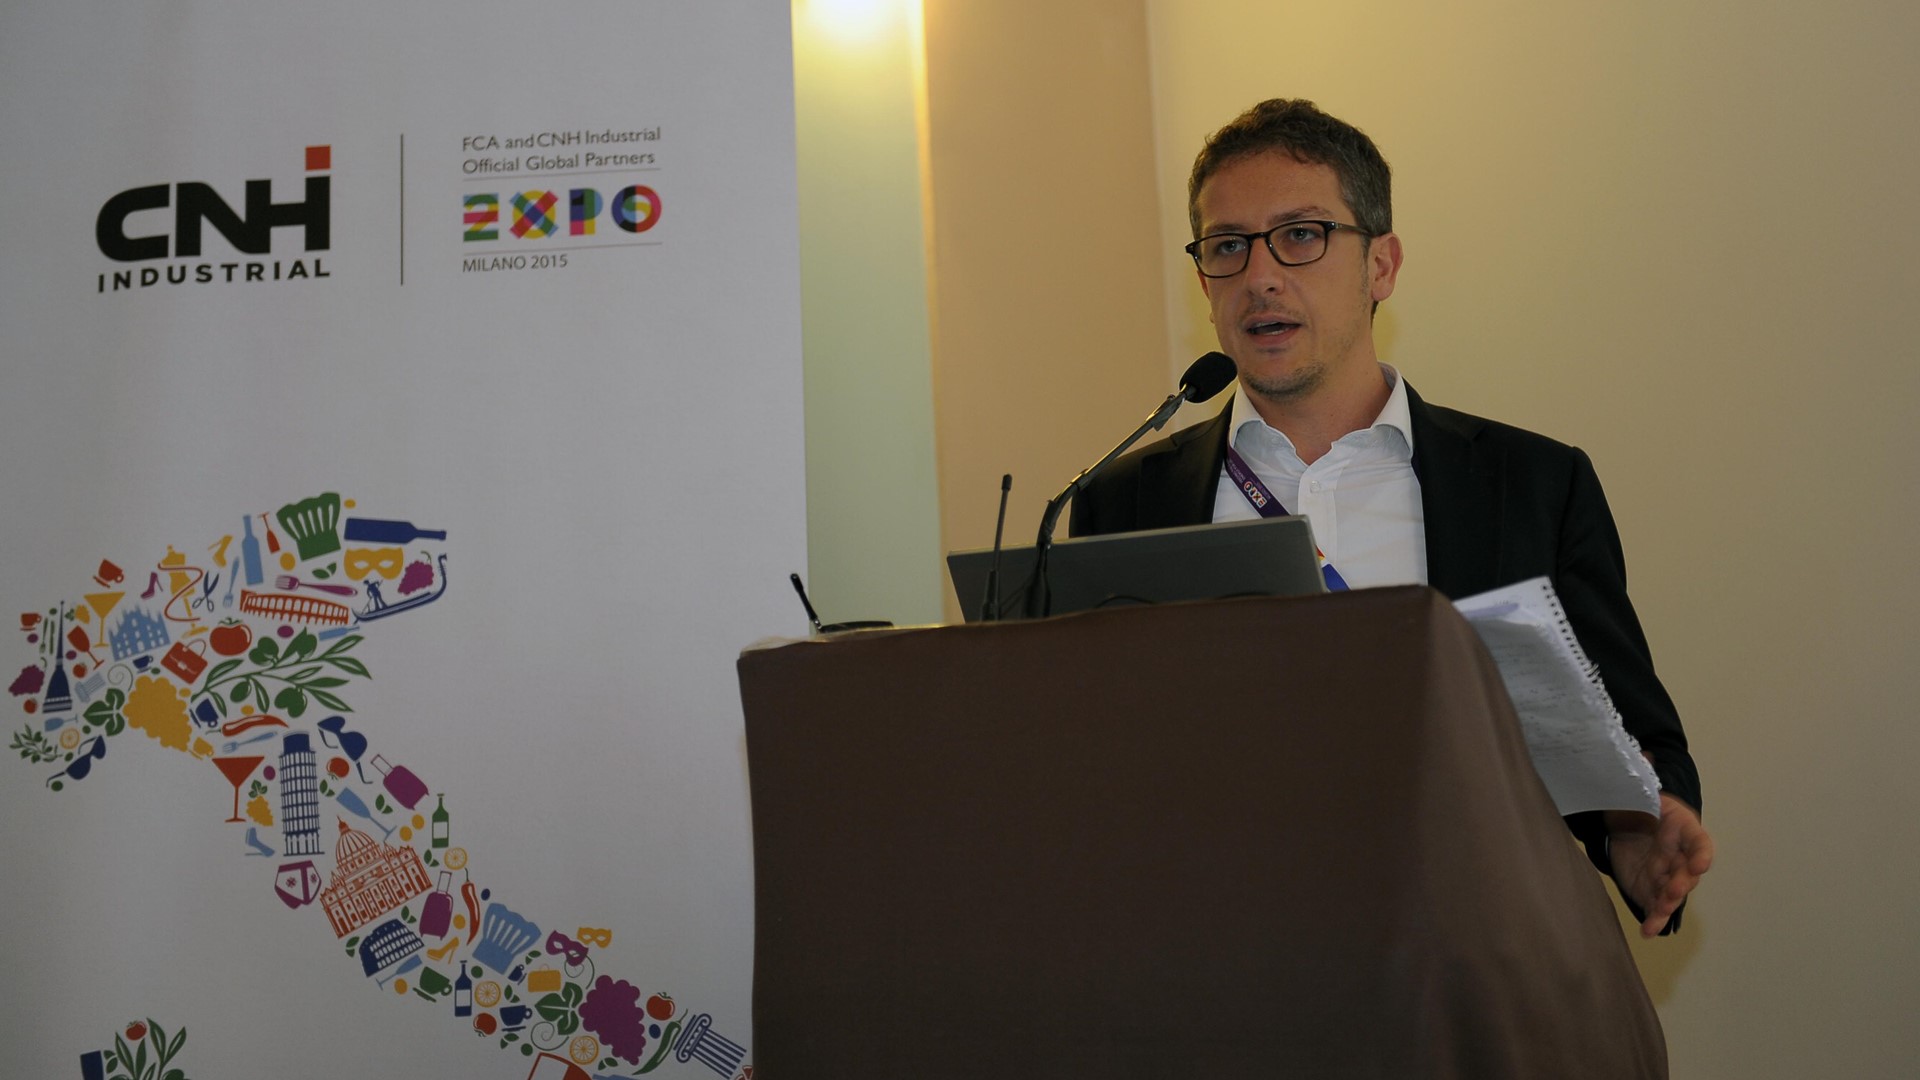 Michele Ziosi, Head of EMEA Institutional Relations, speaks at workshop on sustainable bus fleets